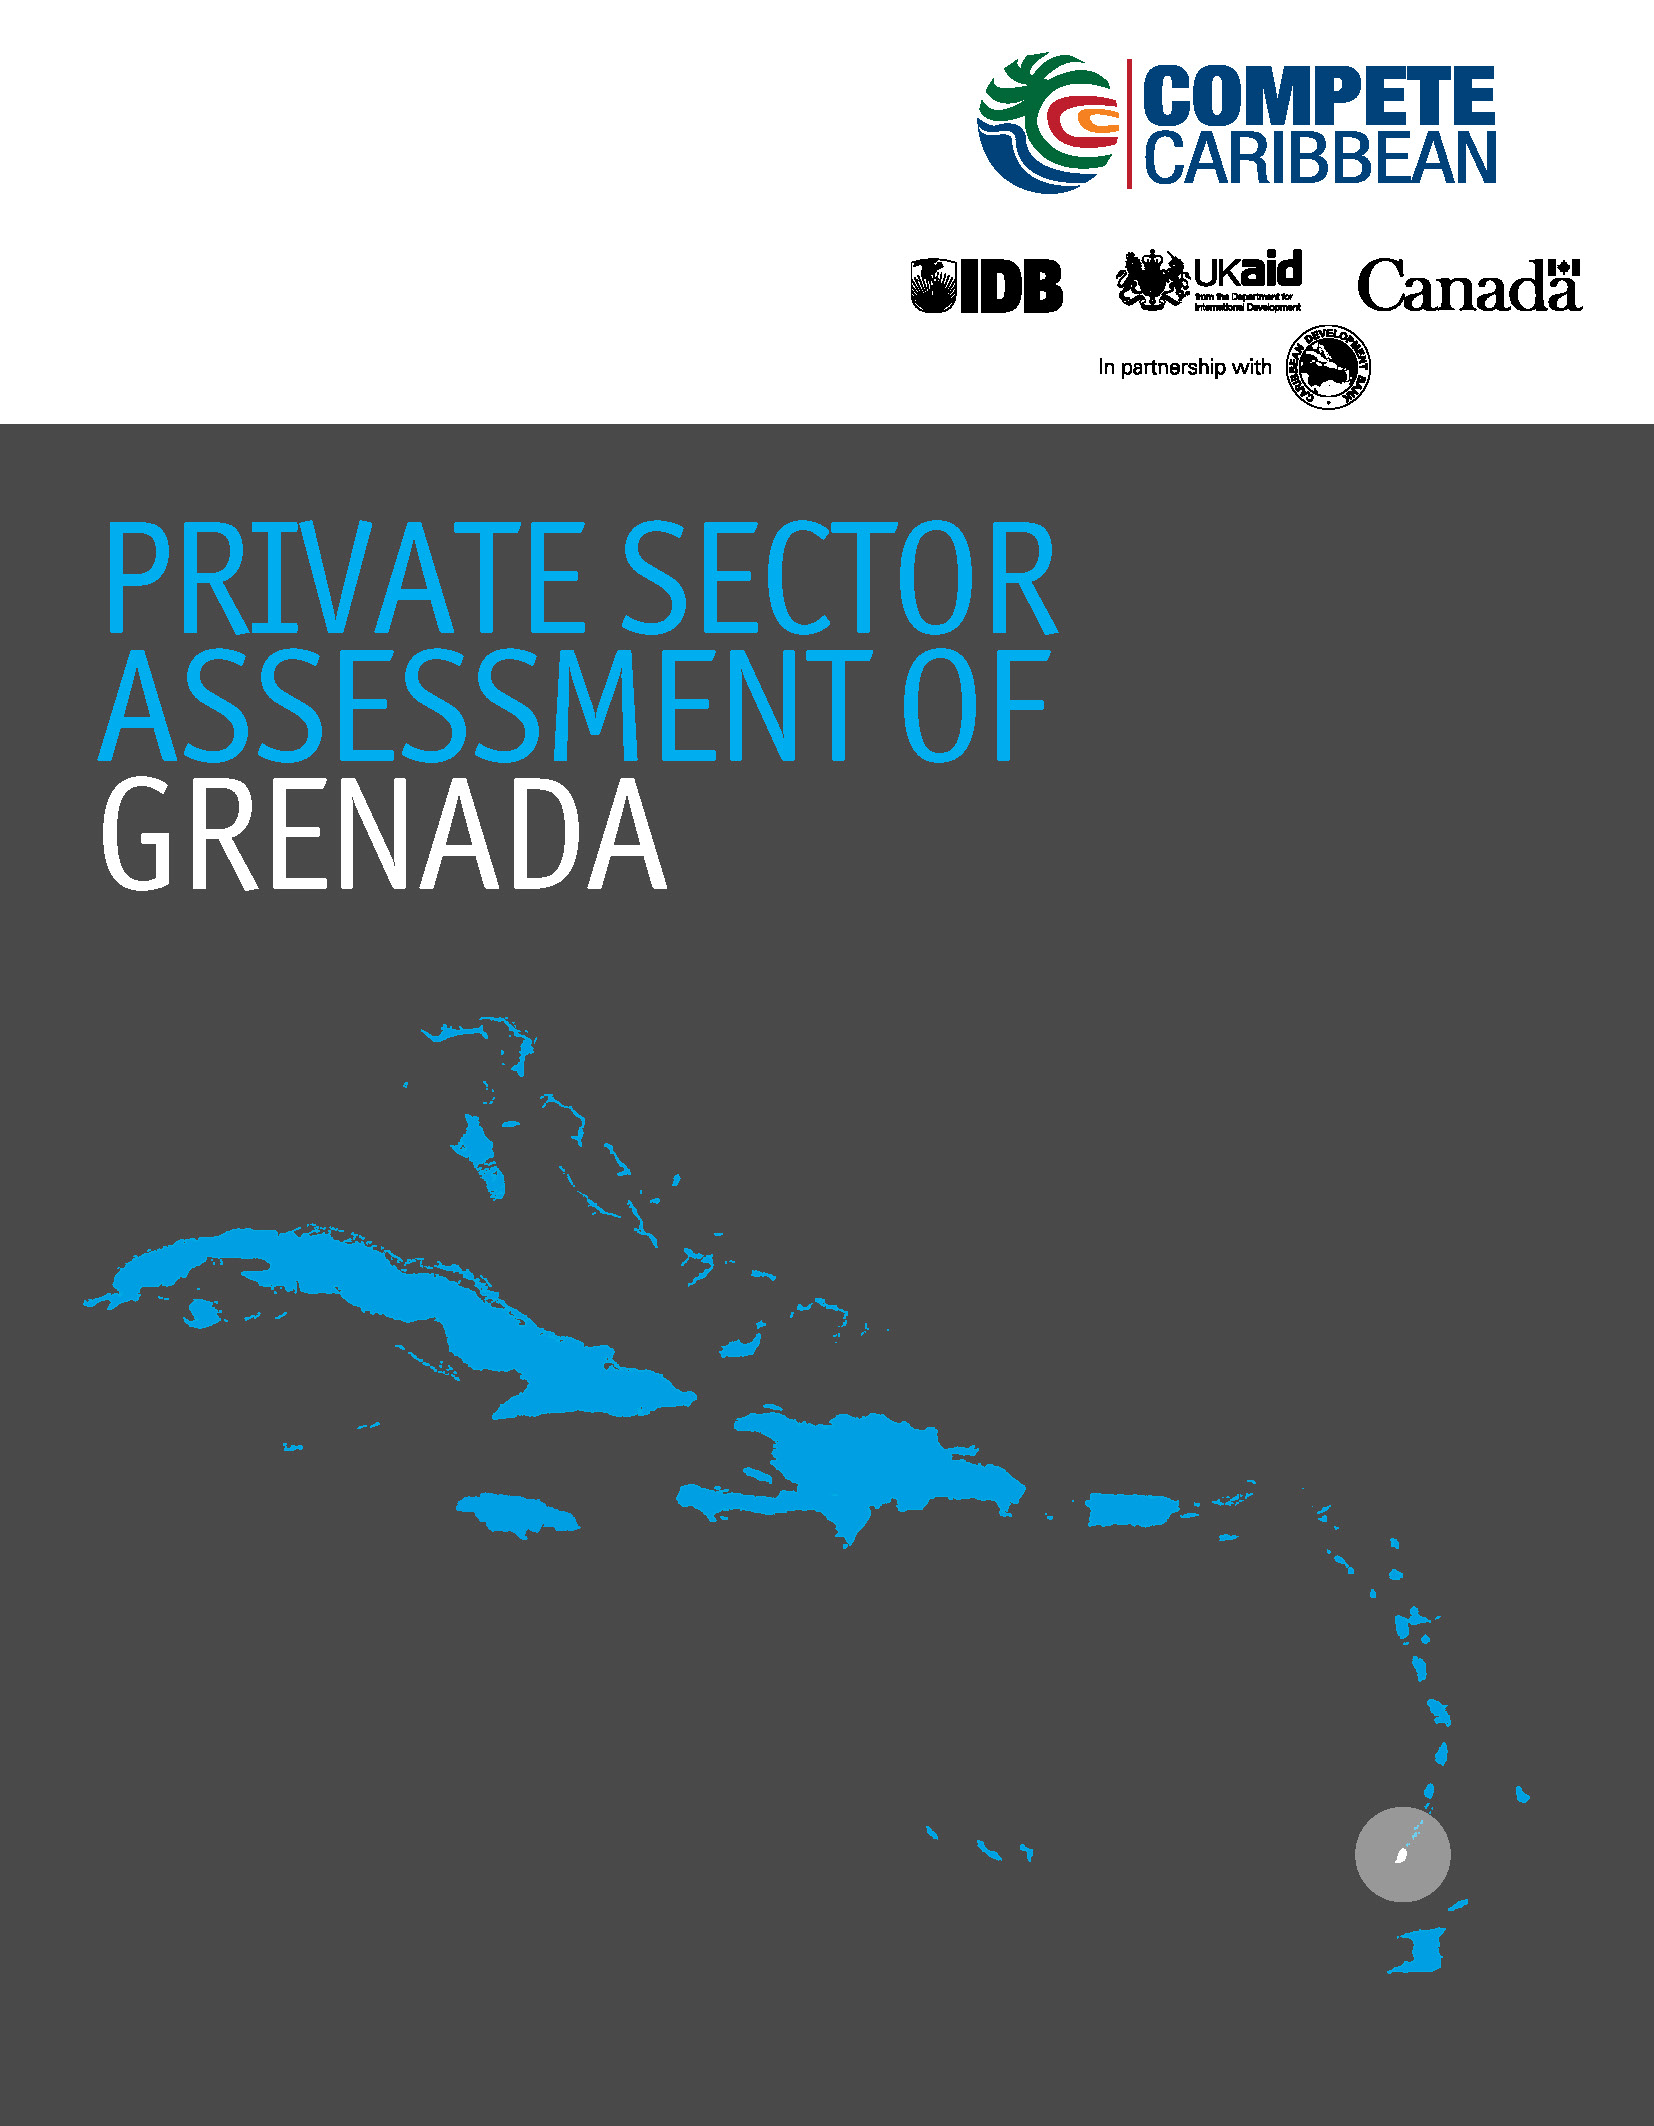 cover showing island chain with Grenada highlighted